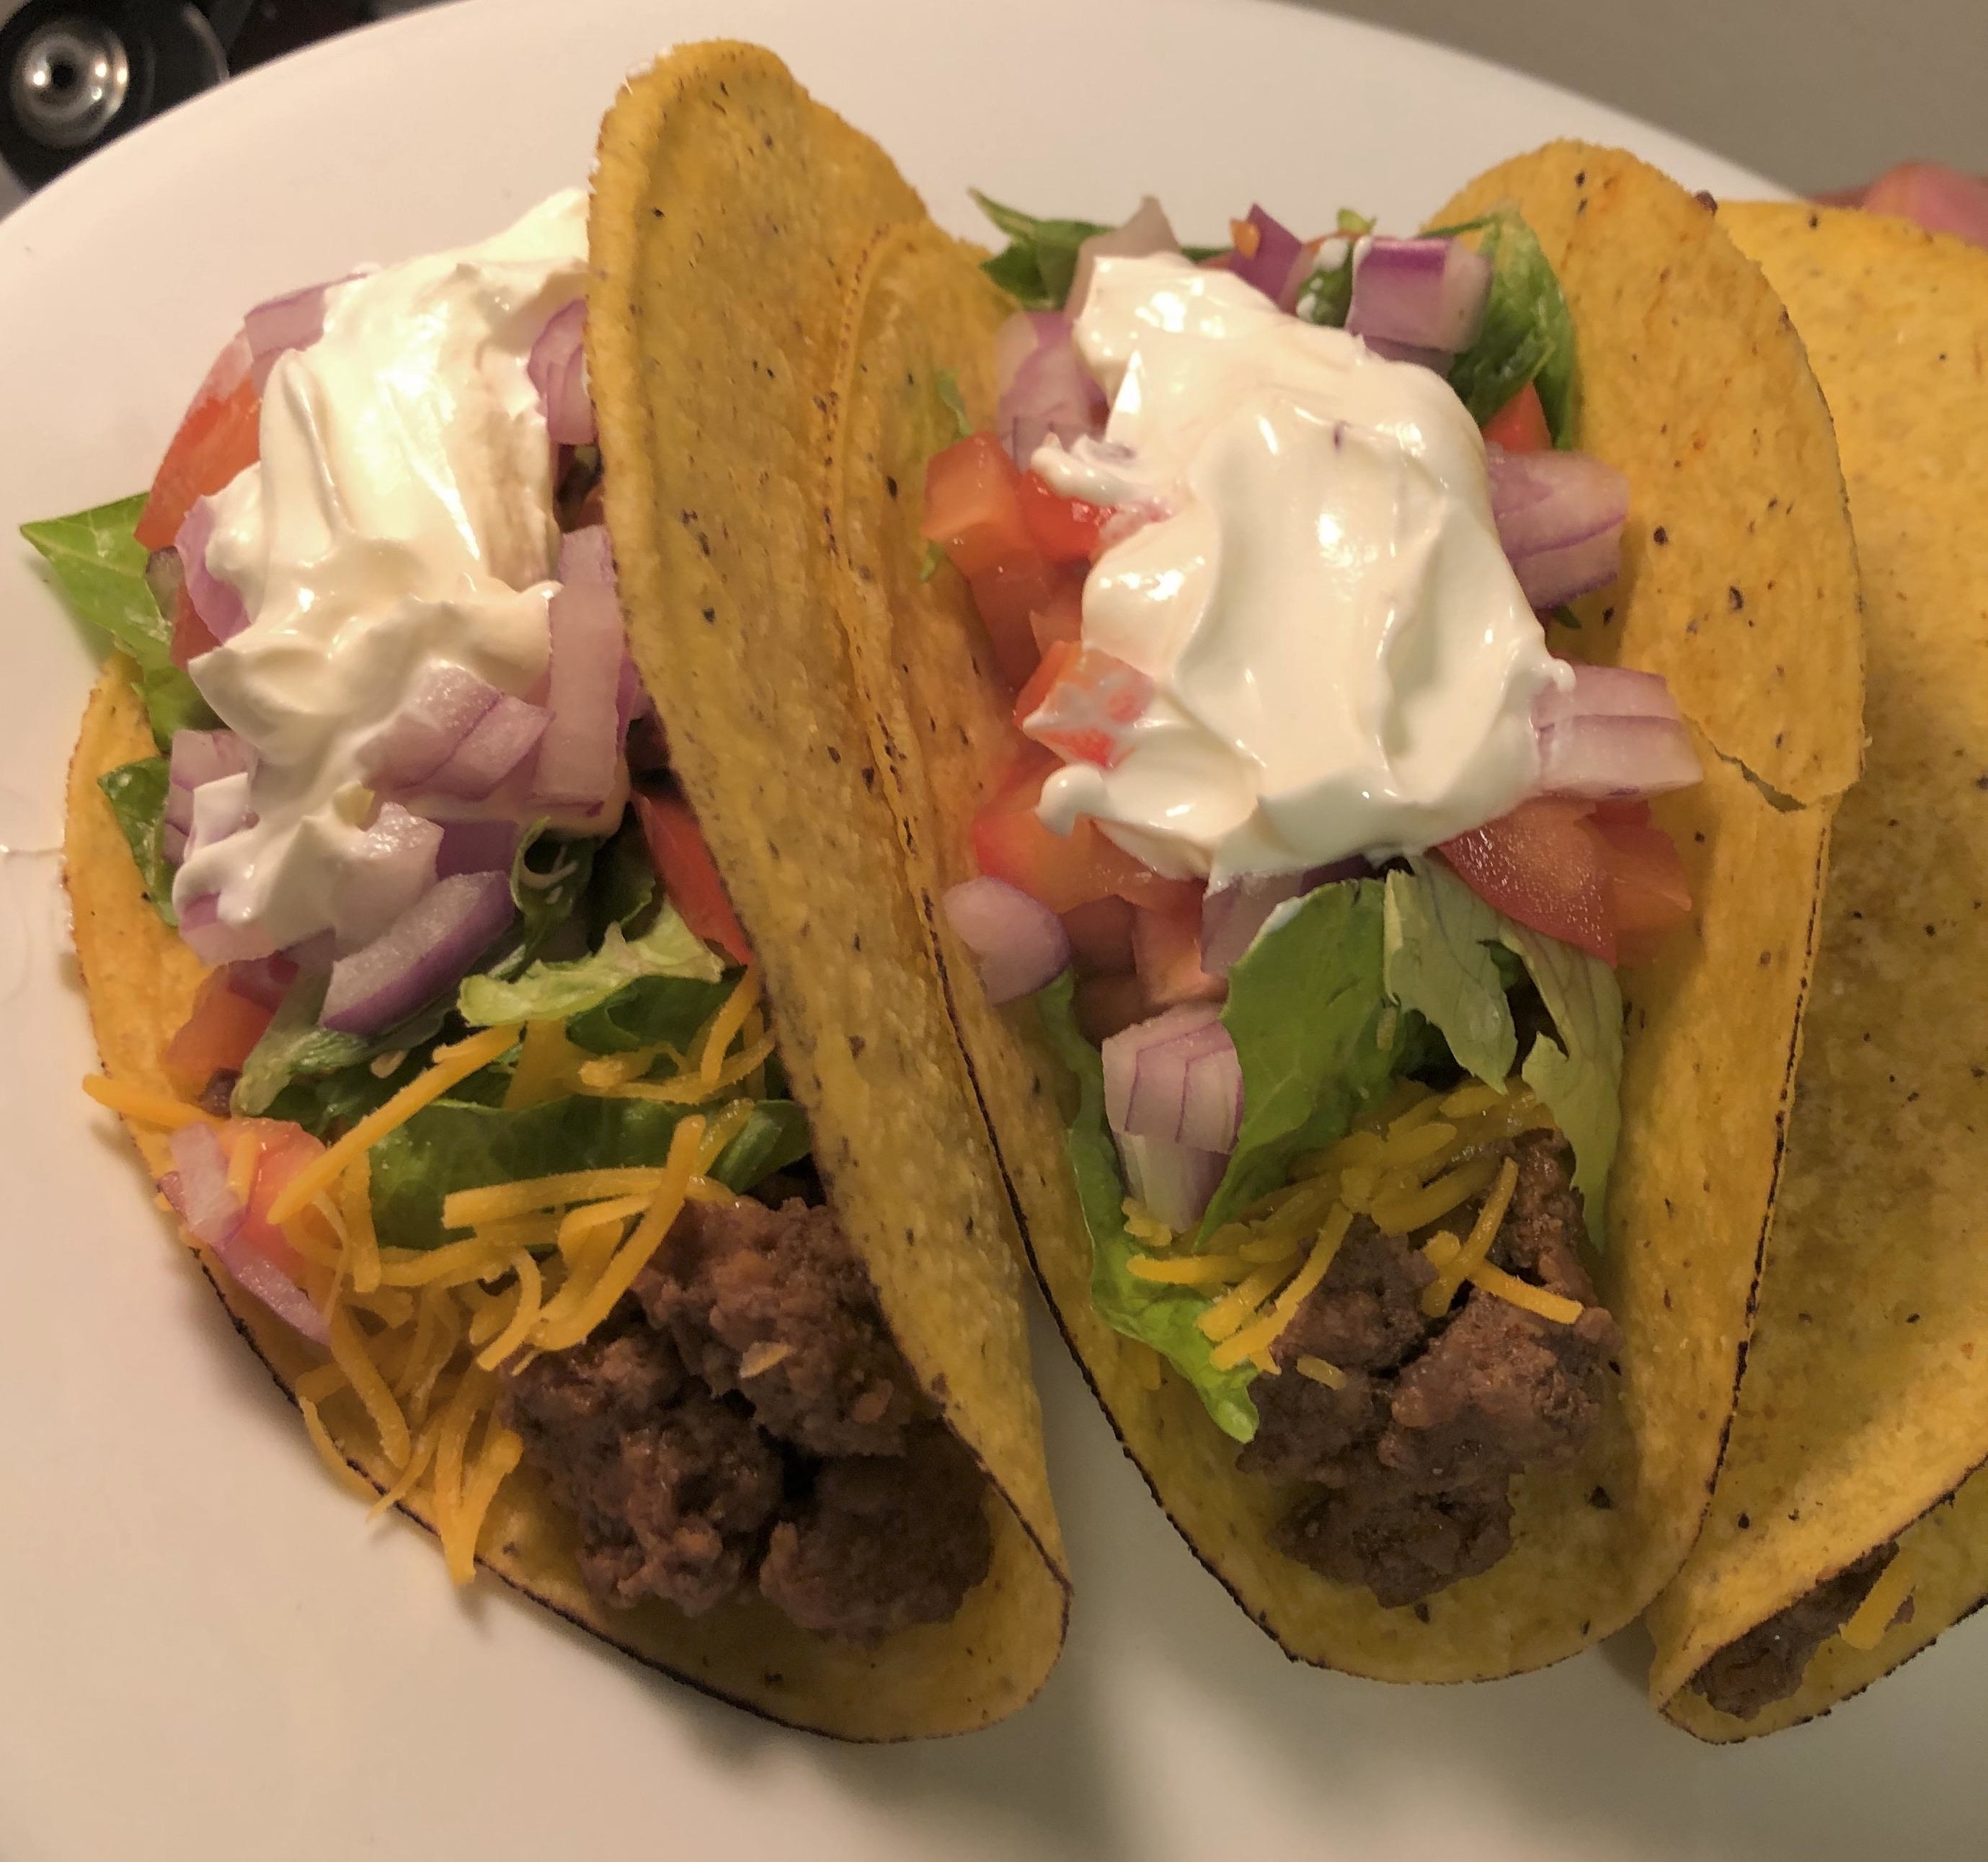 Two tacos with beef, cheese, lettuce, tomato, onions, and sour cream